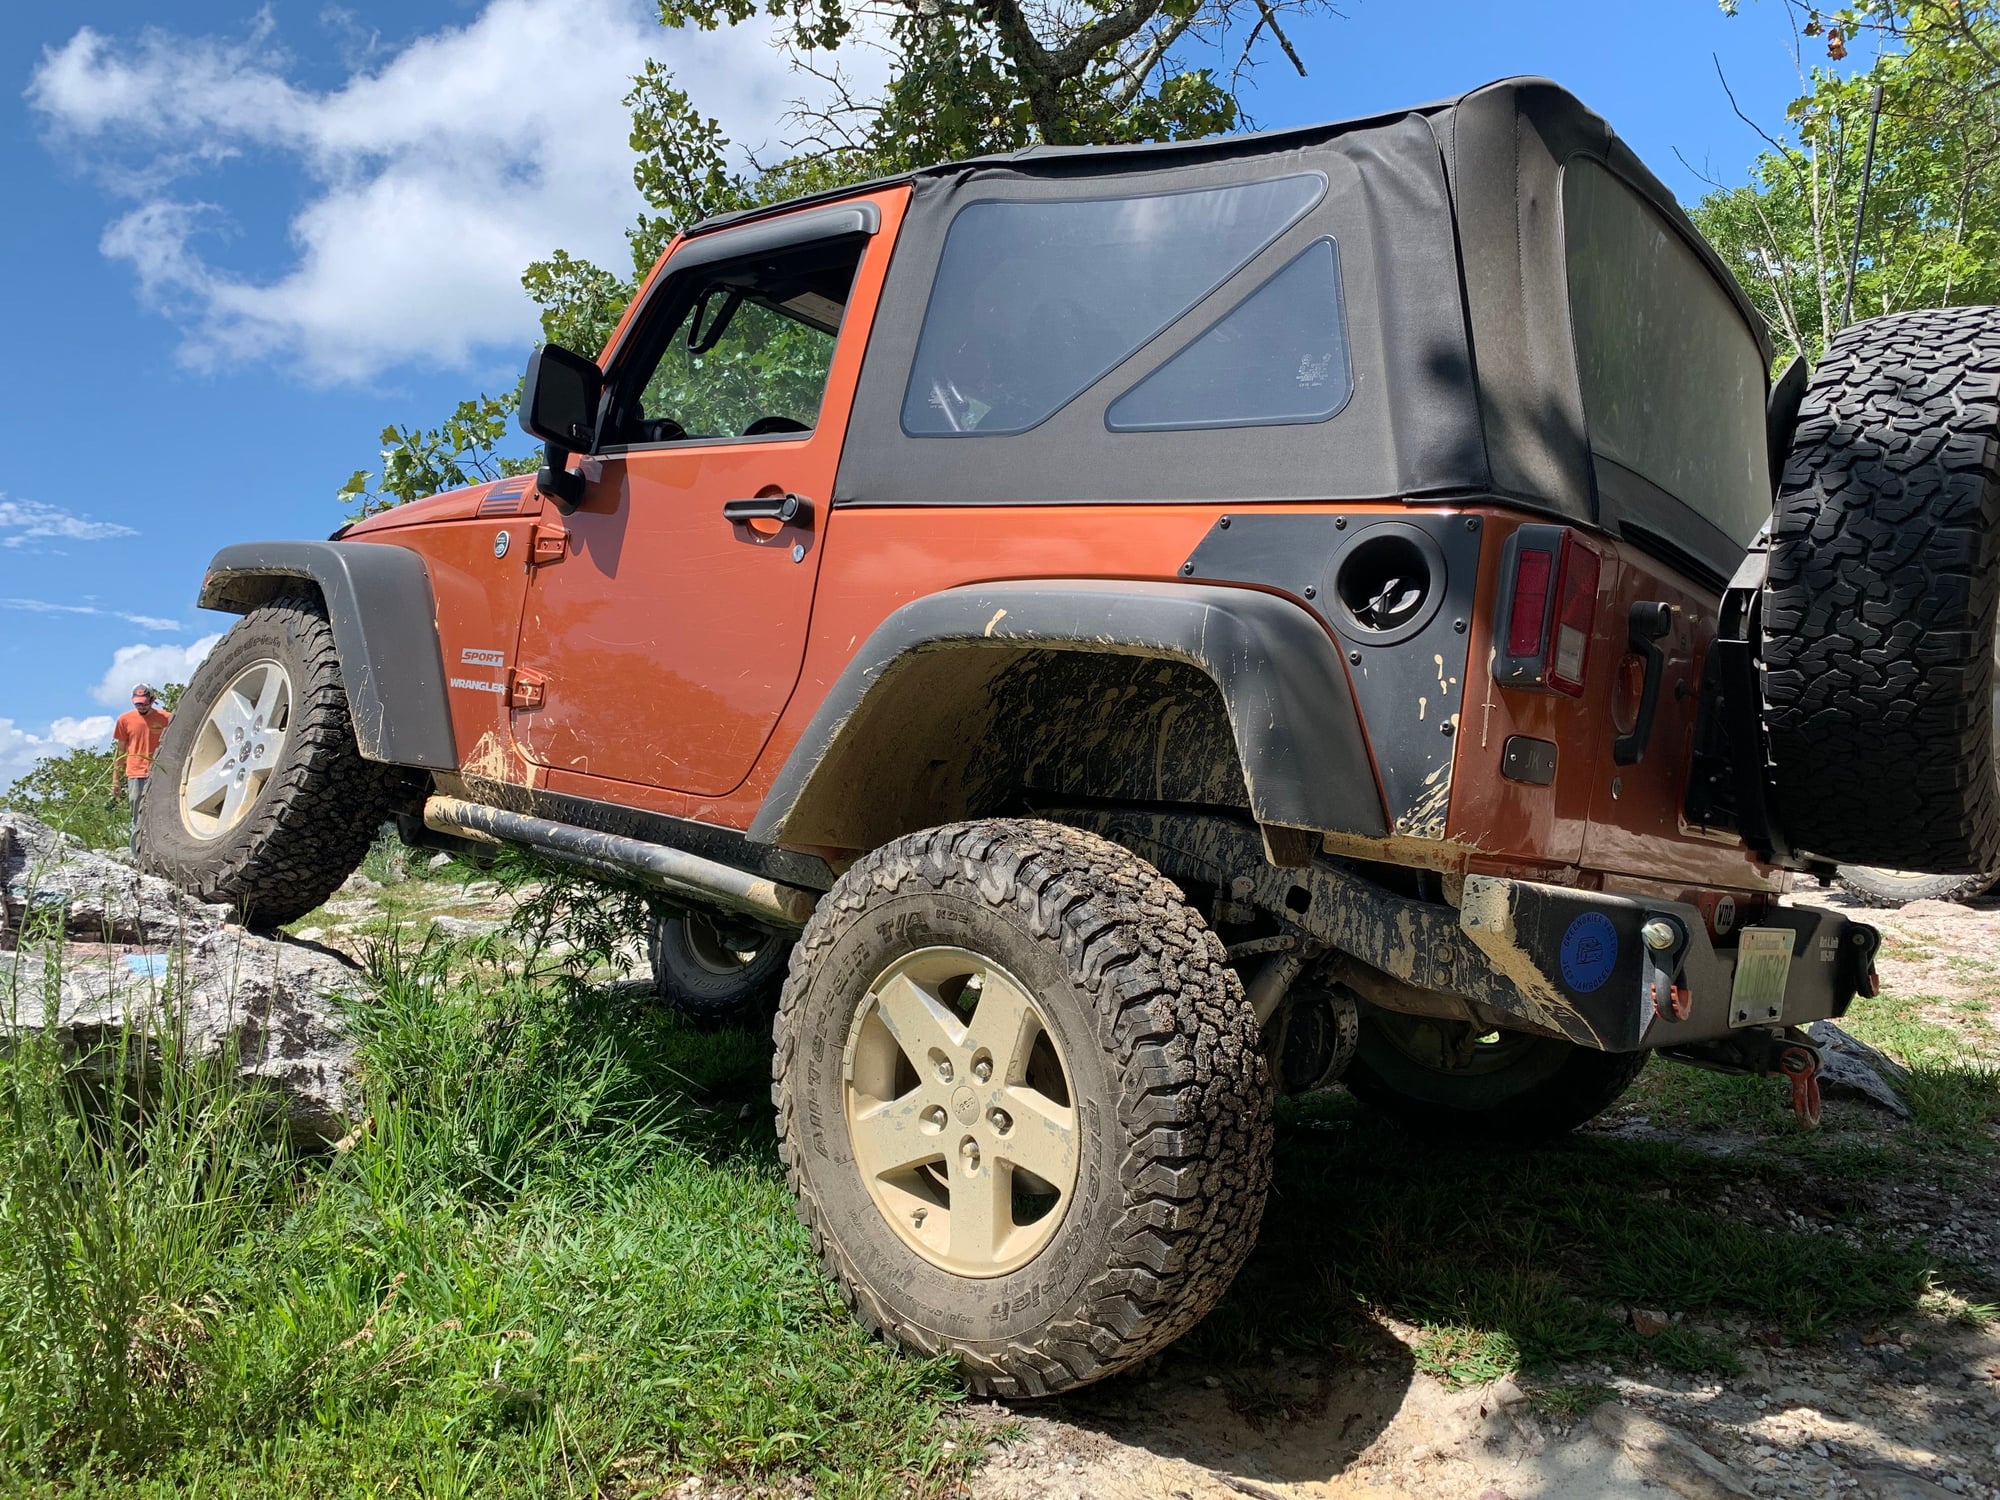 Auto Locker  - The top destination for Jeep JK and JL Wrangler  news, rumors, and discussion